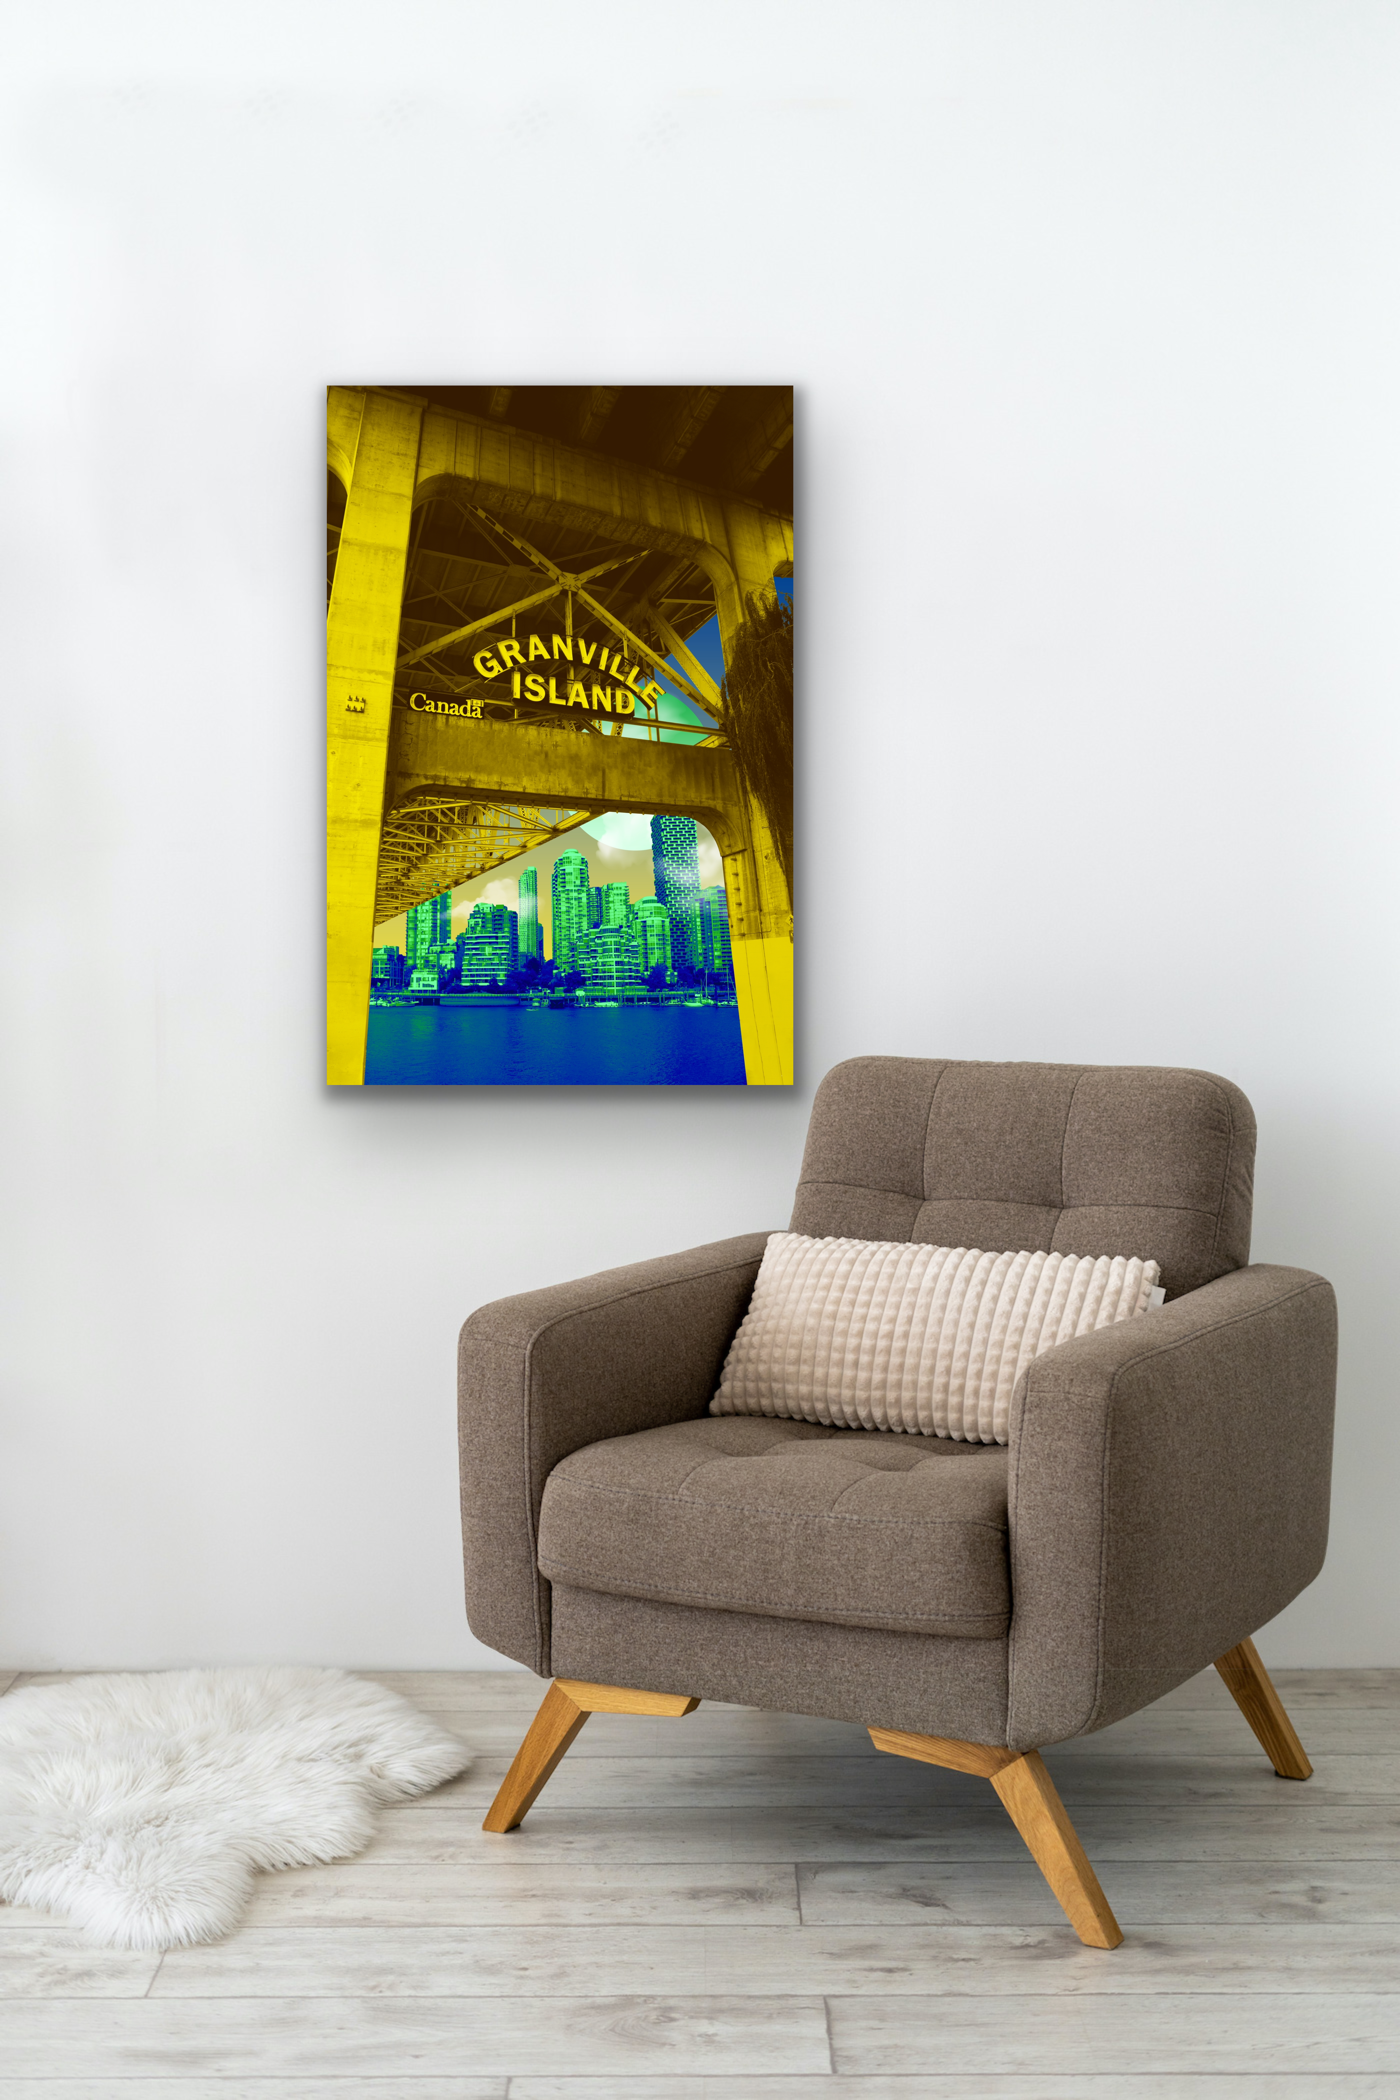 This wall art canvas print will jazz up any room it is placed within.